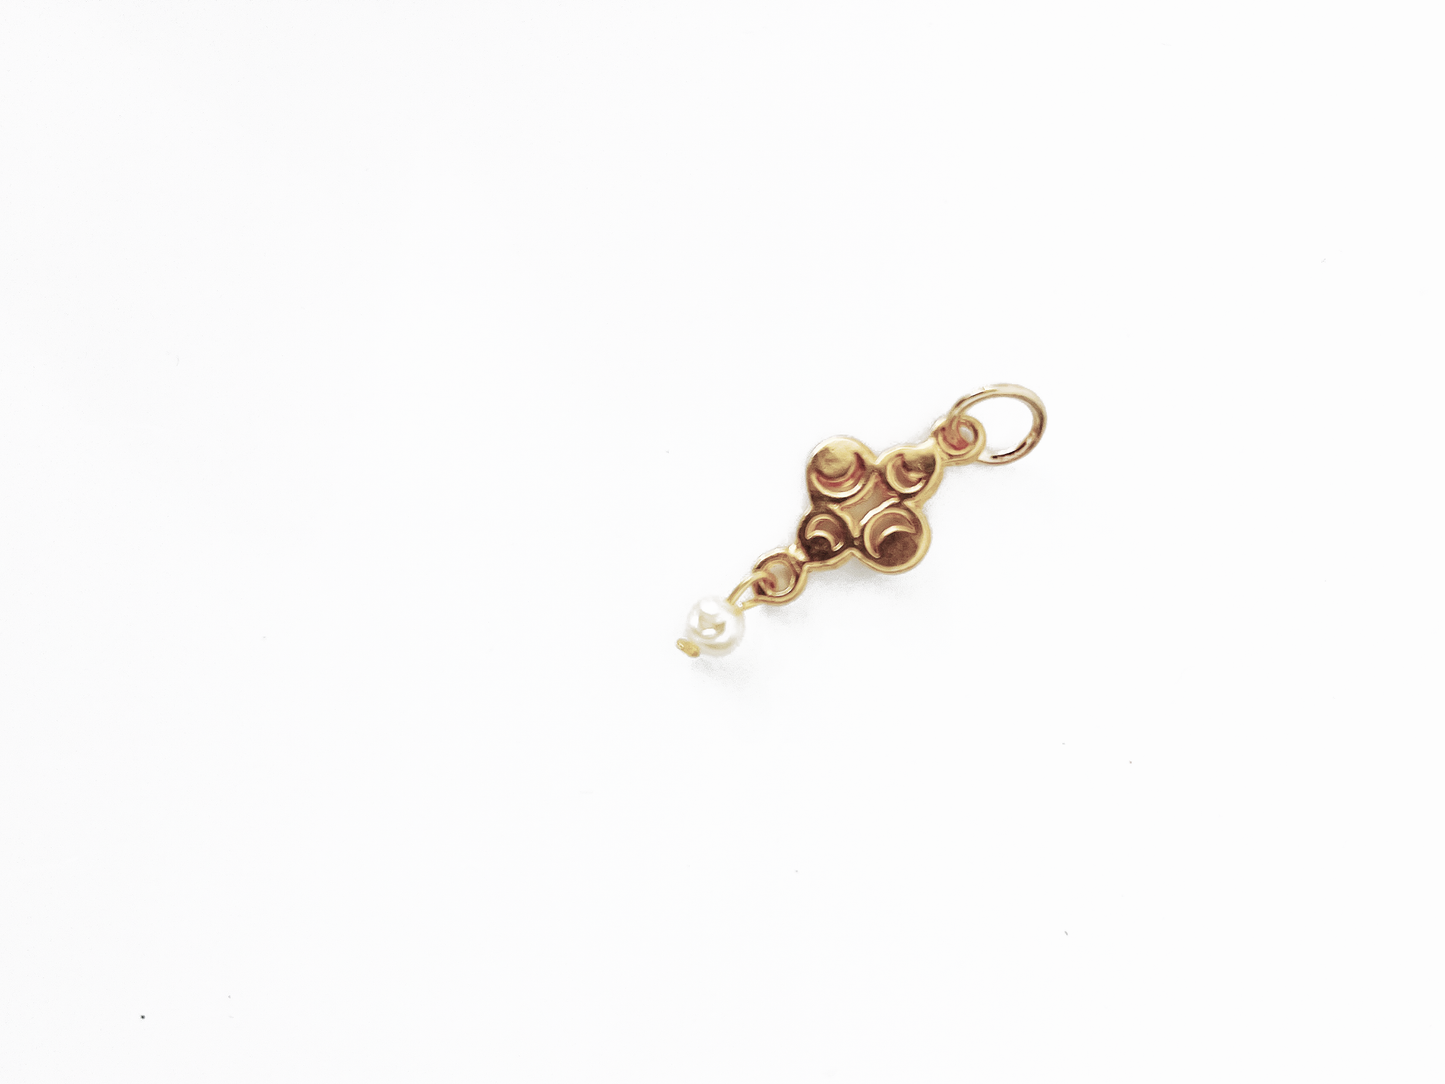 Necklace of Clover charm with a small freshwater pearl white by Hikaru Pearl